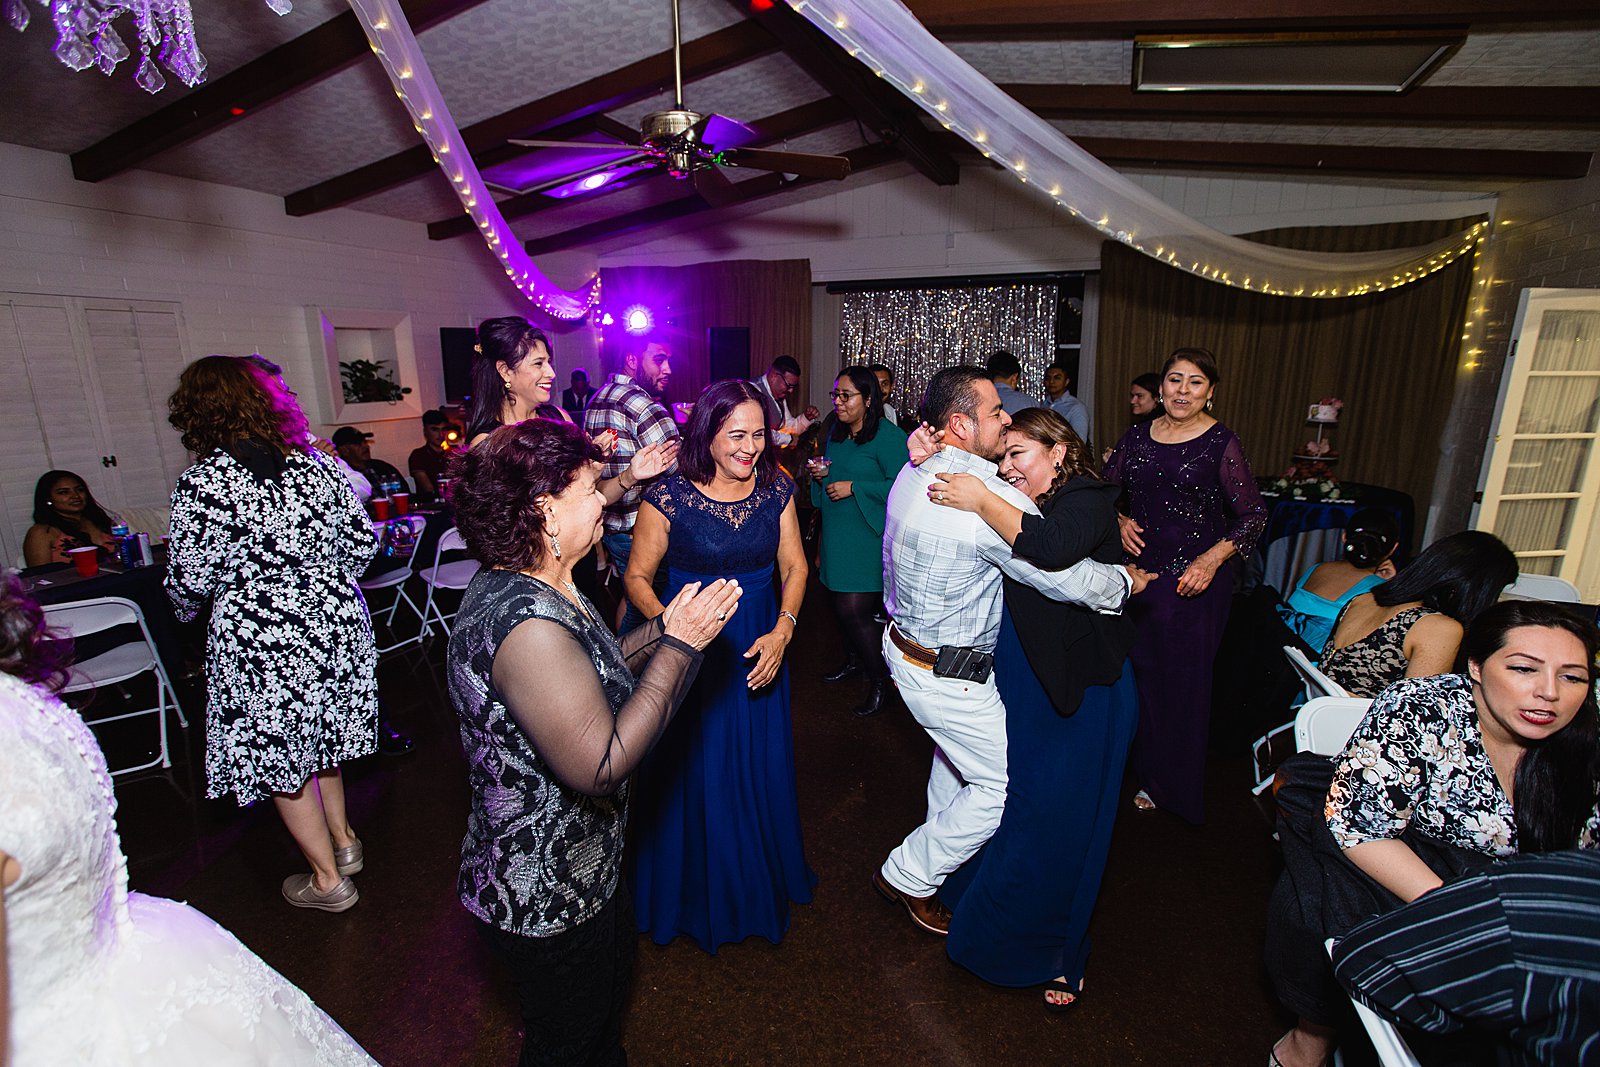 Guests dancing together at Valley Garden Center wedding reception by Phoenix wedding photographer PMA Photography